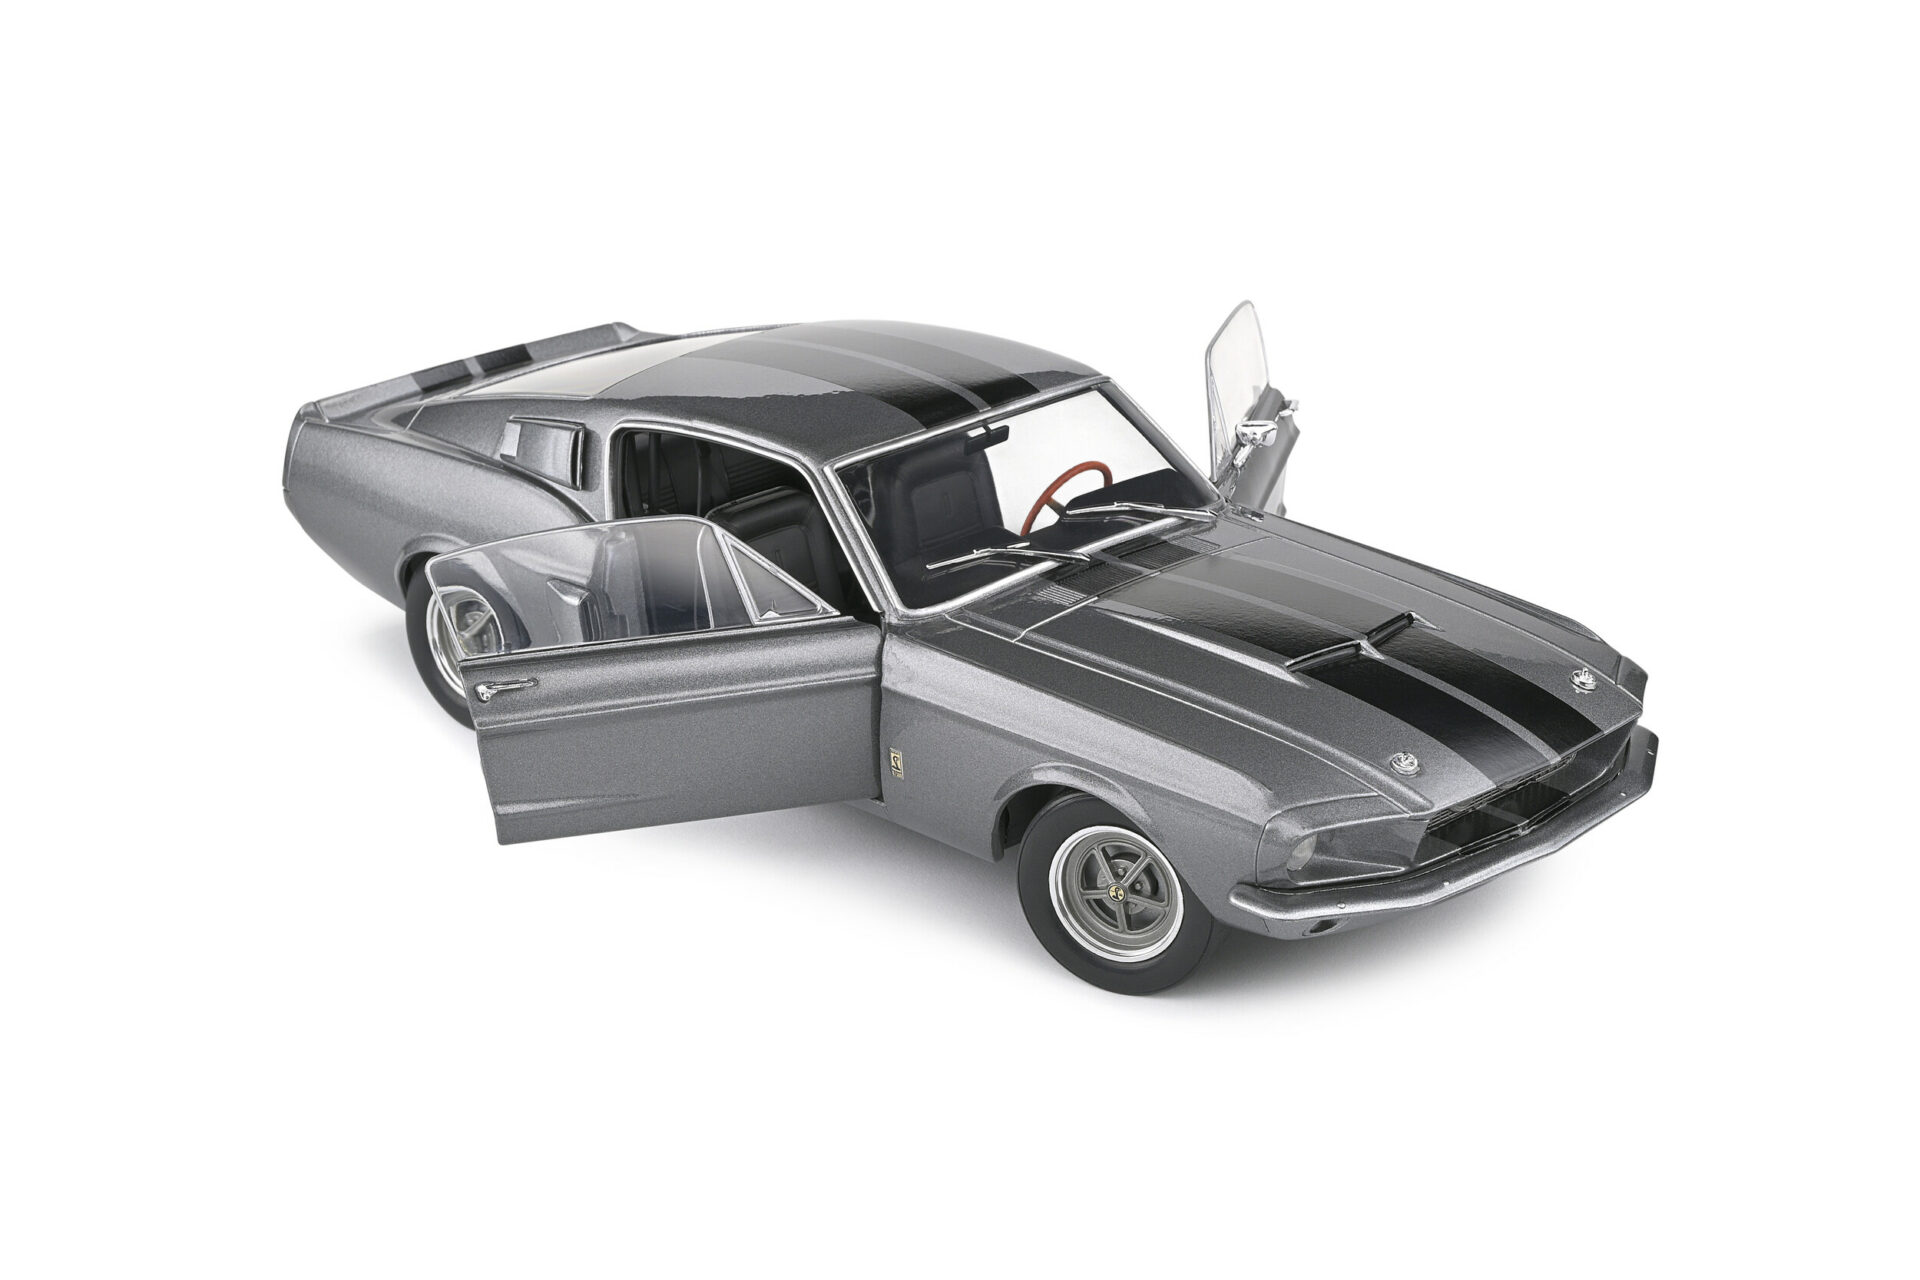 S1802905 Ford Shelby GT500 Fastback 1967 1:18 diecast model car Solido